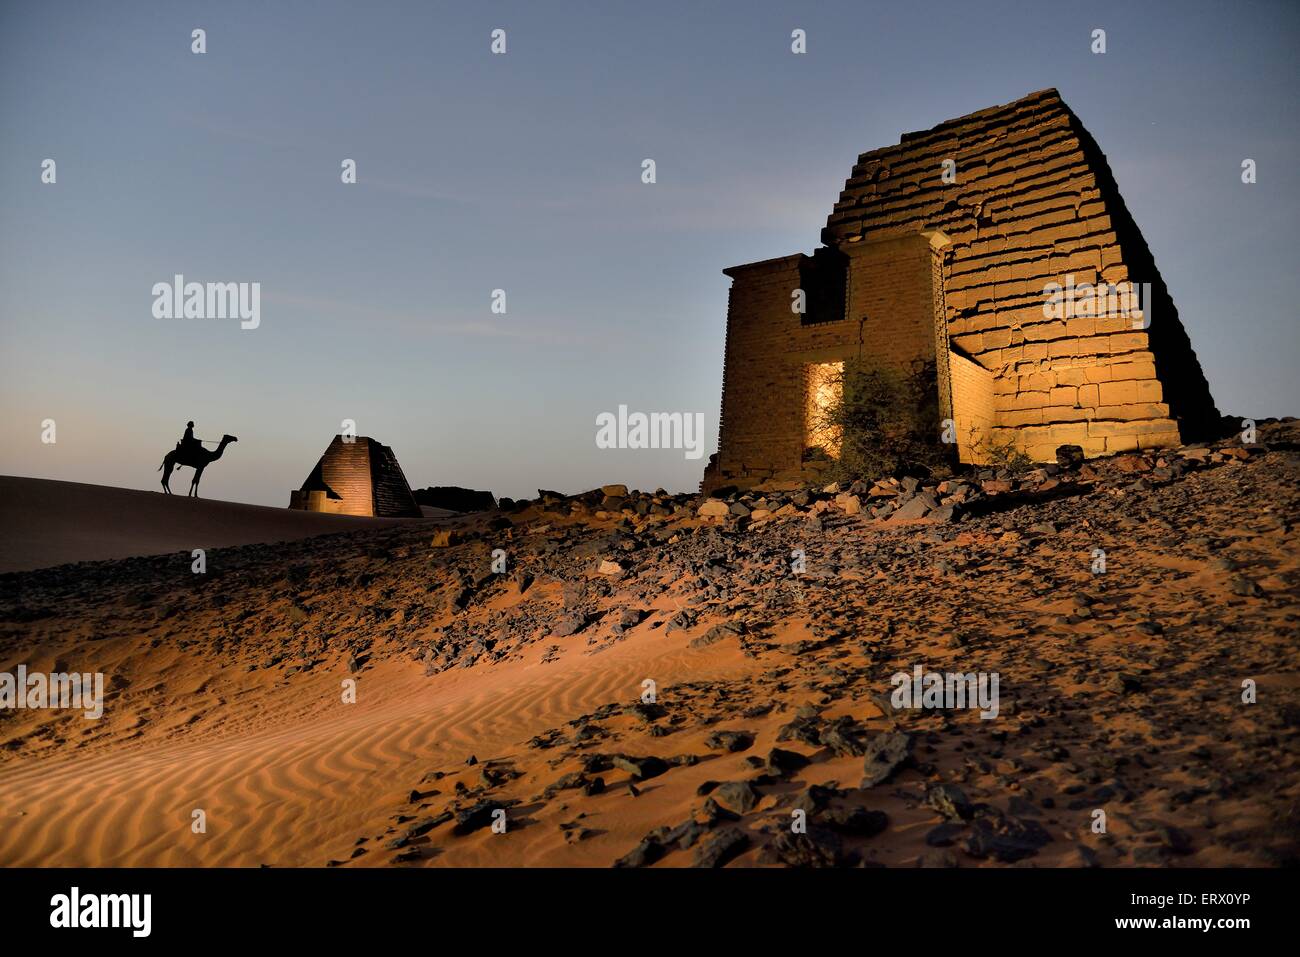 Pyramid of the northern cemetery of Meroe in the evening, Black Pharaohs, Nubia, Nahr an-Nil, Sudan Stock Photo